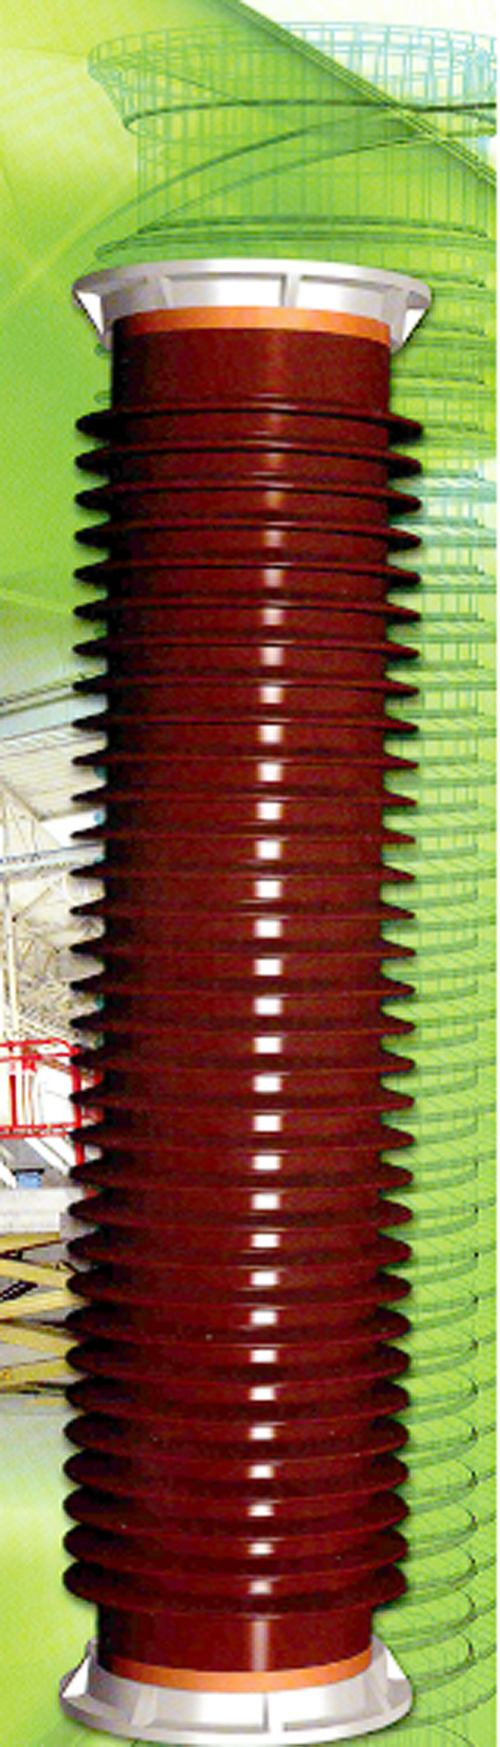 SAMA reaches an agreement with LAPP Insulators Group to produce high voltage mega-insulators